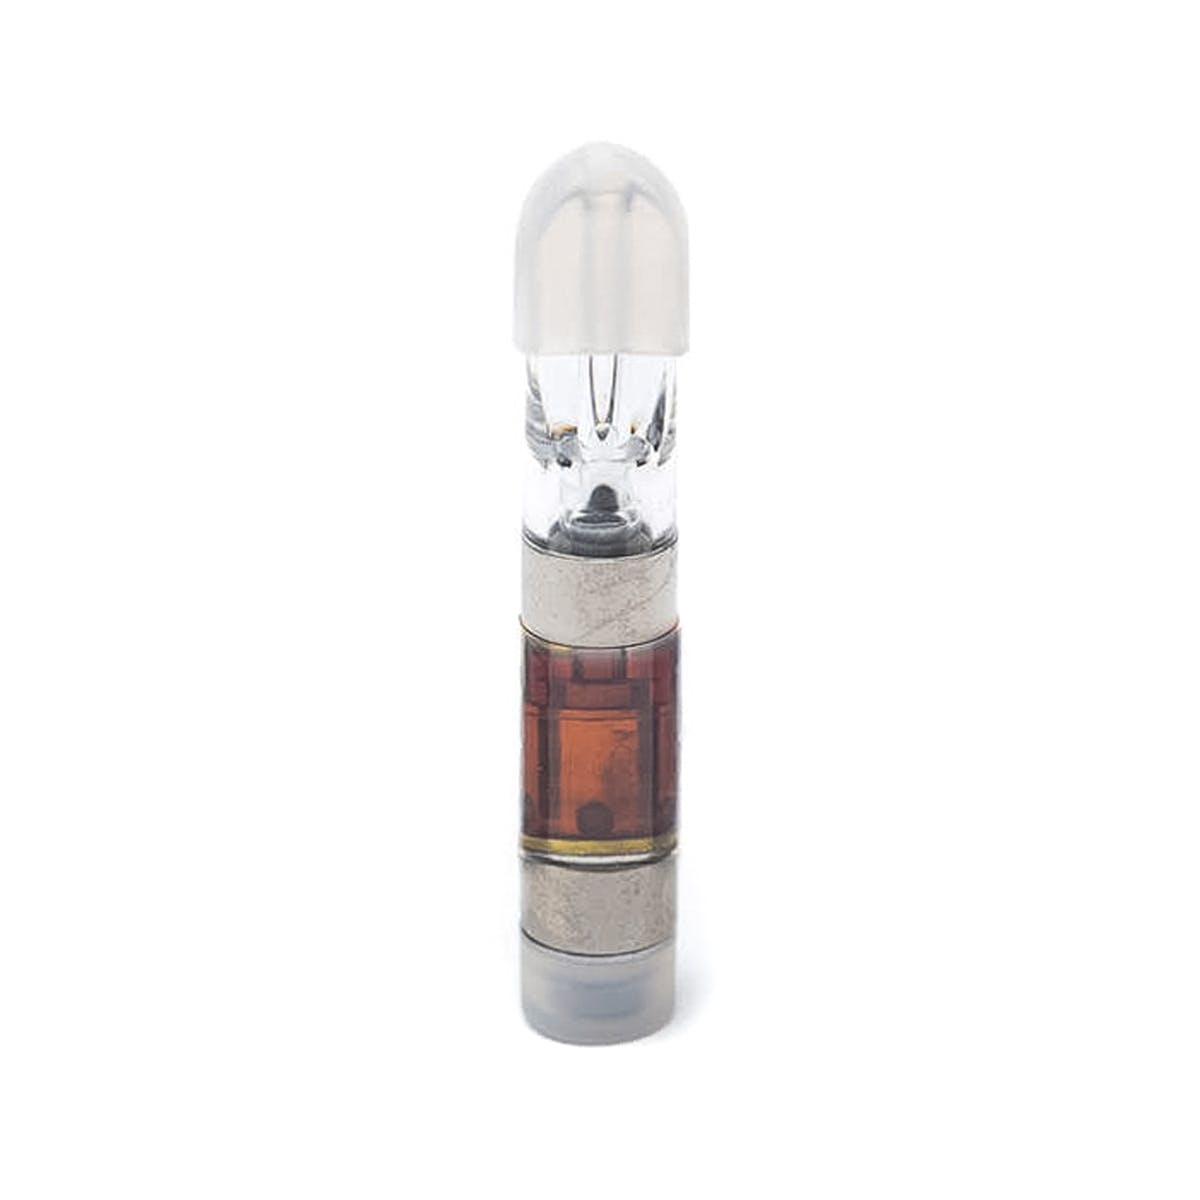 concentrate-wellness-connection-first-sunrise-vape-cartridge